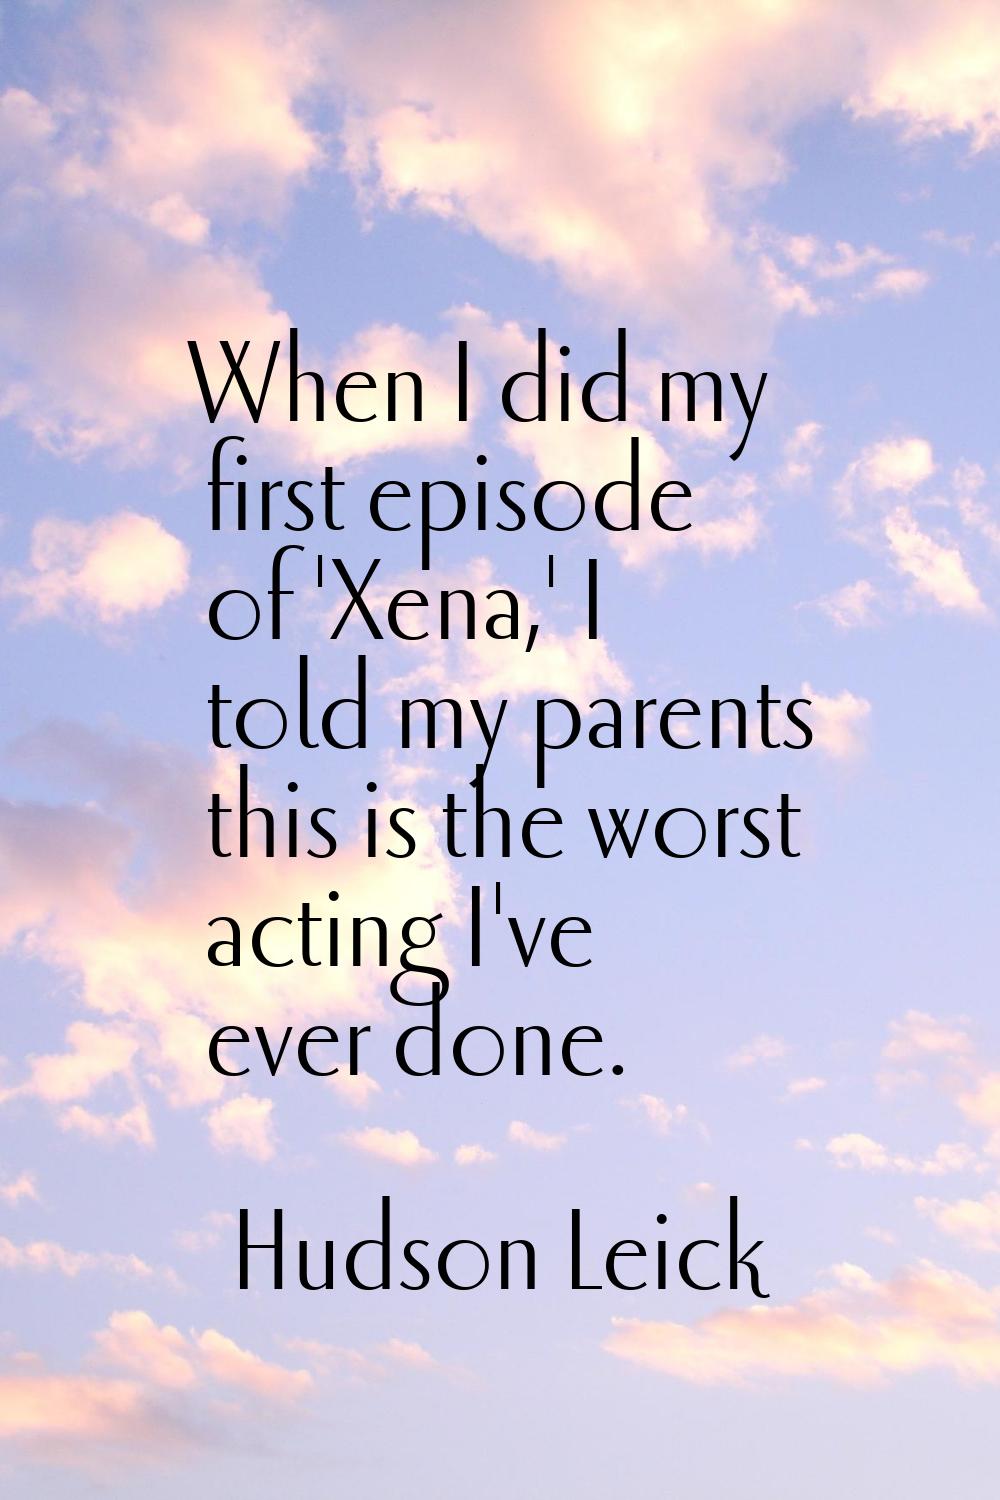 When I did my first episode of 'Xena,' I told my parents this is the worst acting I've ever done.